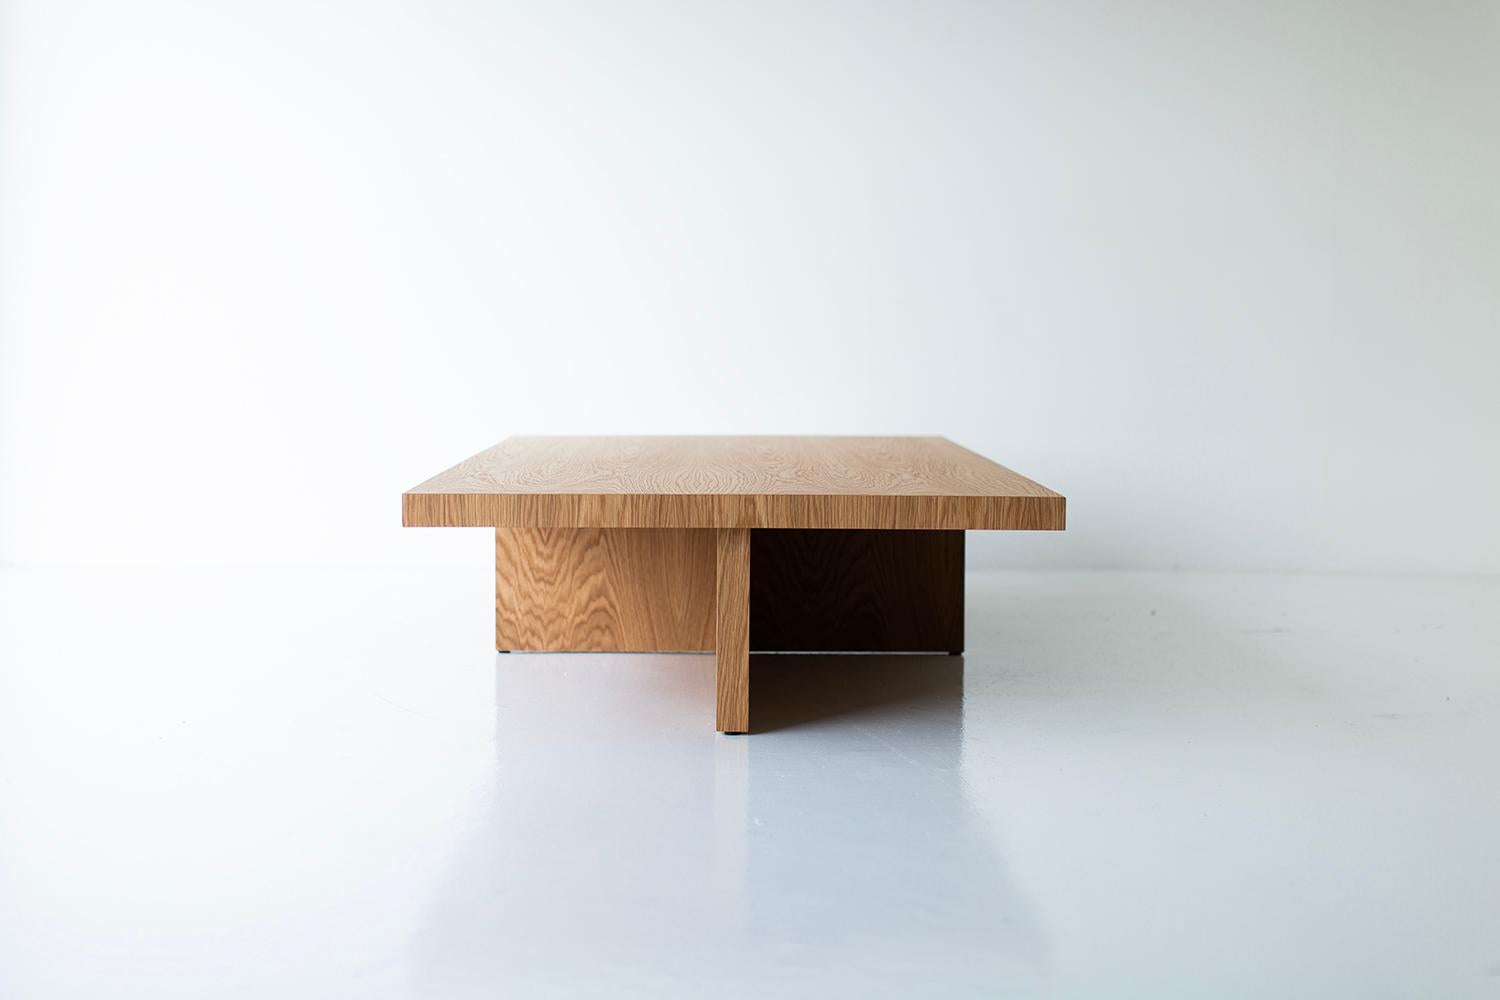 Bertu Coffee Table, Cross Base Coffee Table, Modern, White Oak, Oakley

This Oakley Cross Base Coffee Table in White Oak is made in the heart of Ohio with locally sourced wood. Each table is hand-made with mitered corners from white oak veneer and